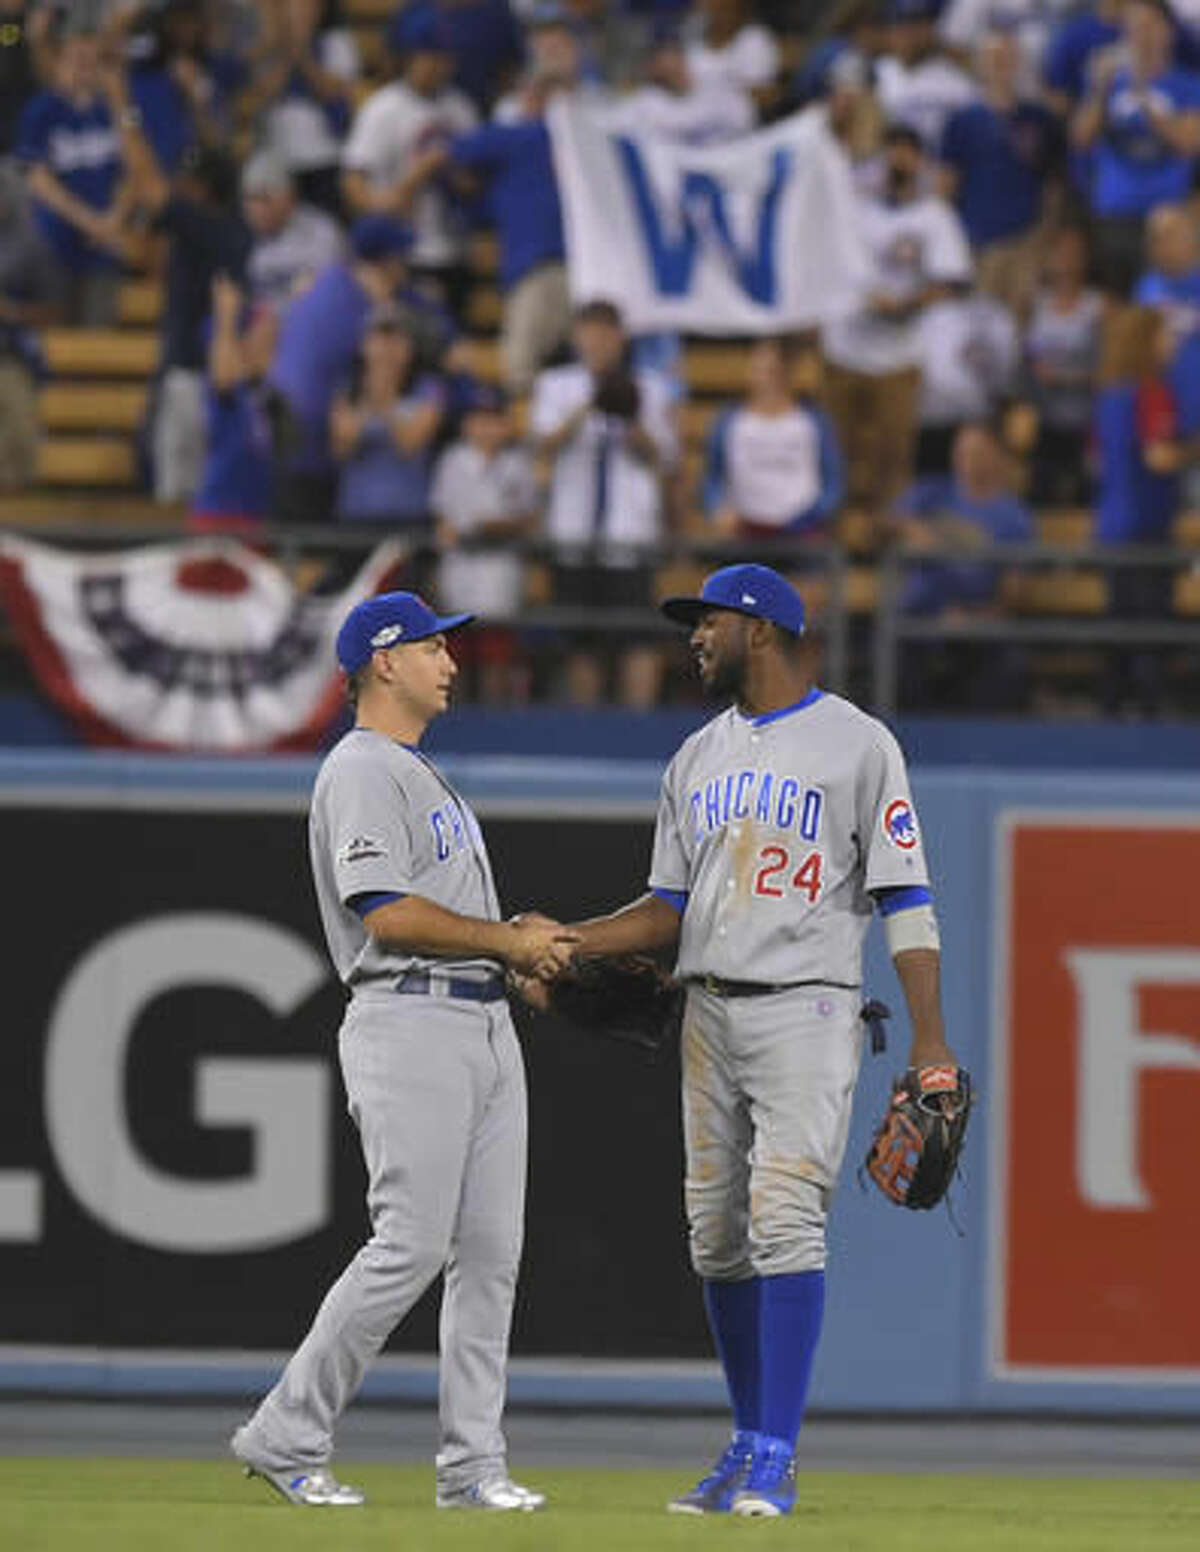 Chicago Cubs' Albert Almora Jr. and Dexter Fowler celebrate after Game 5 of the National League baseball championship series against the Los Angeles Dodgers Thursday, Oct. 20, 2016, in Los Angeles. The Cubs won 8-4 to take a 3-2 lead in the series. (AP Photo/Mark J. Terrill)